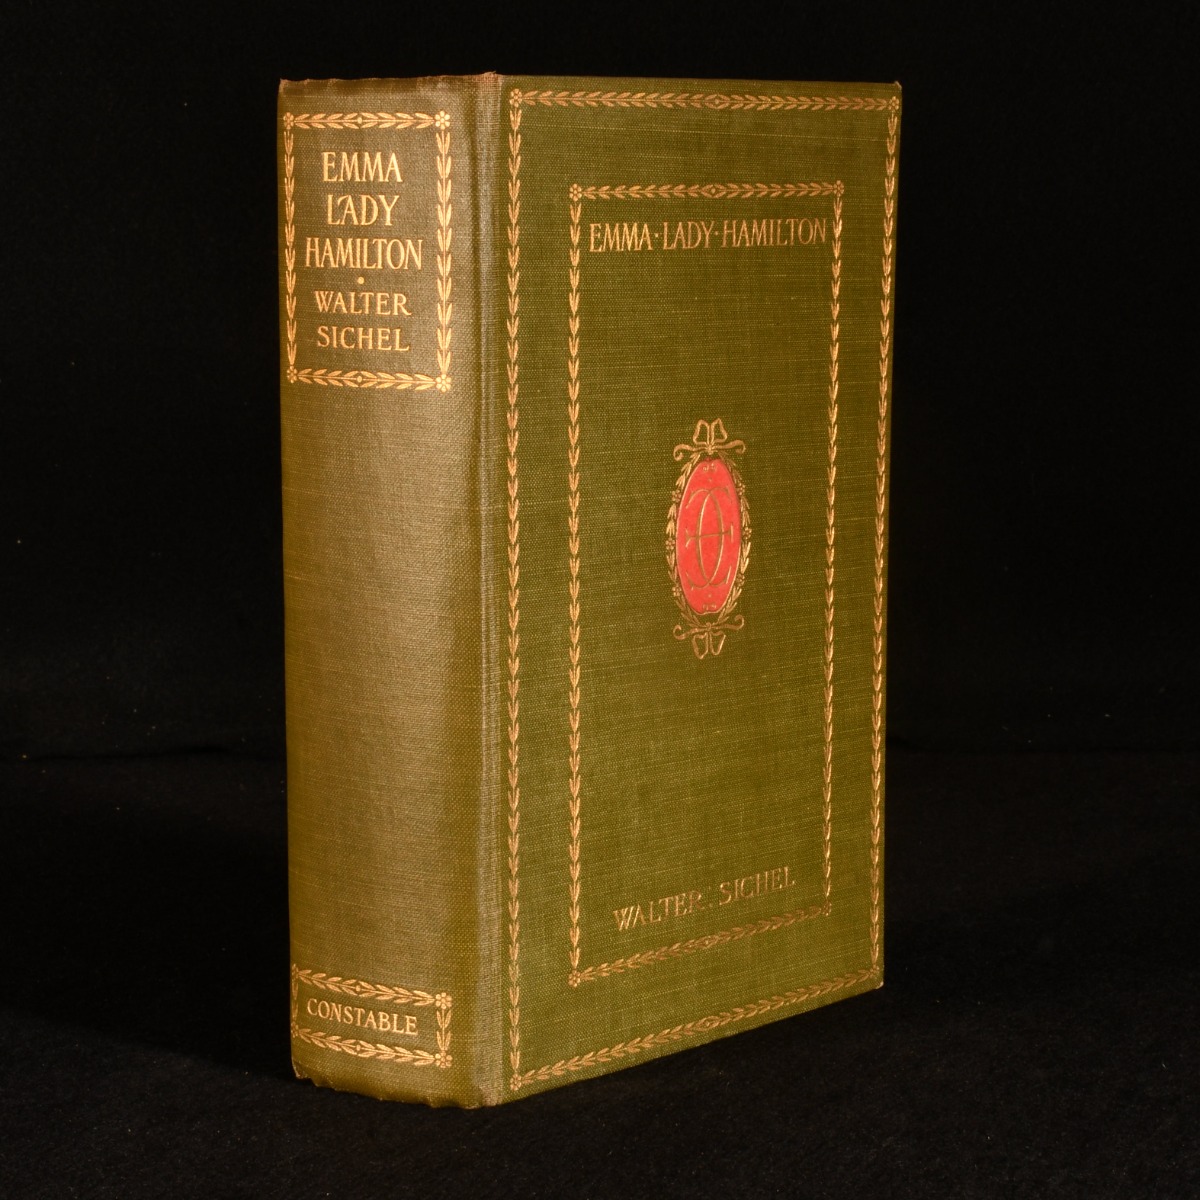 Emma Lady Hamilton: From new and original sources and documents - Walter Sichel